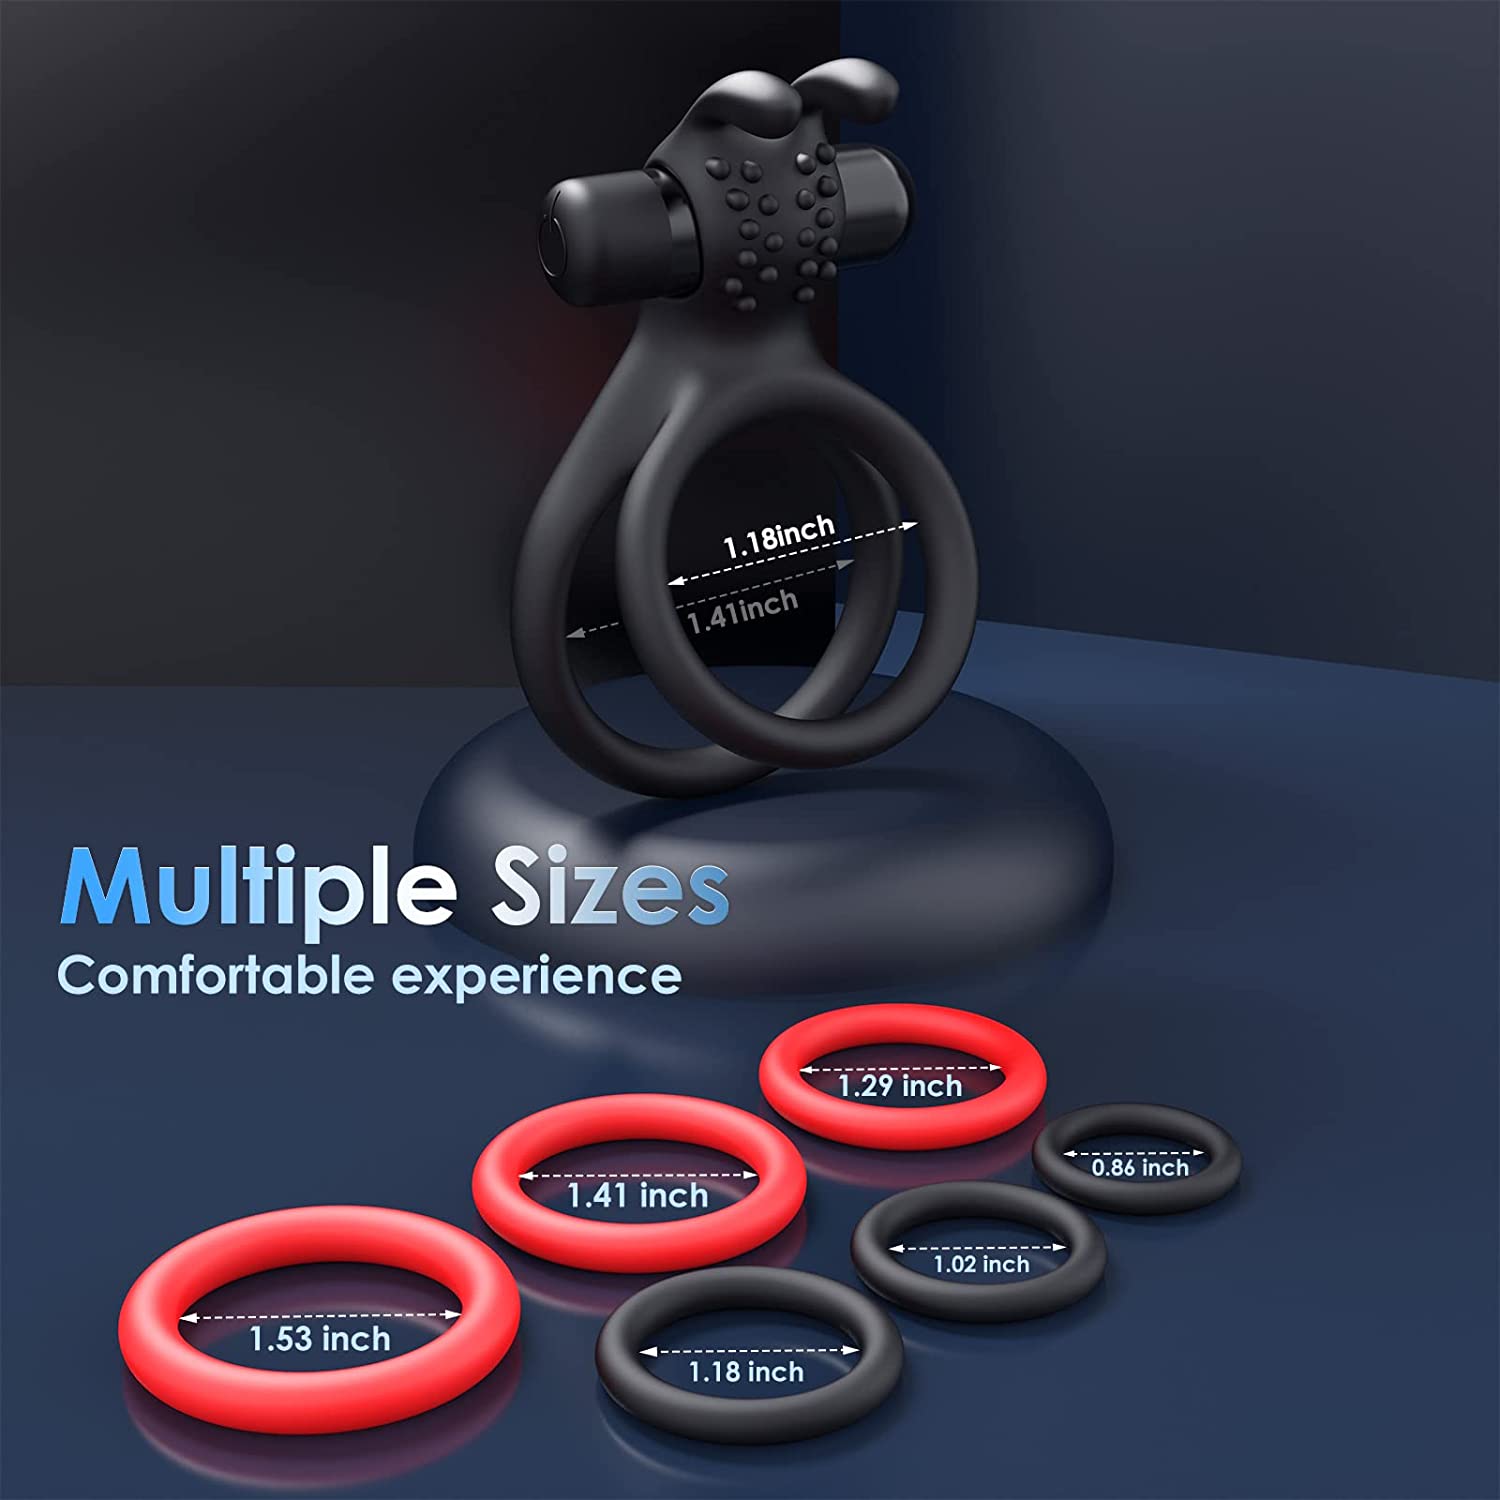 Penis Ring with Vibration